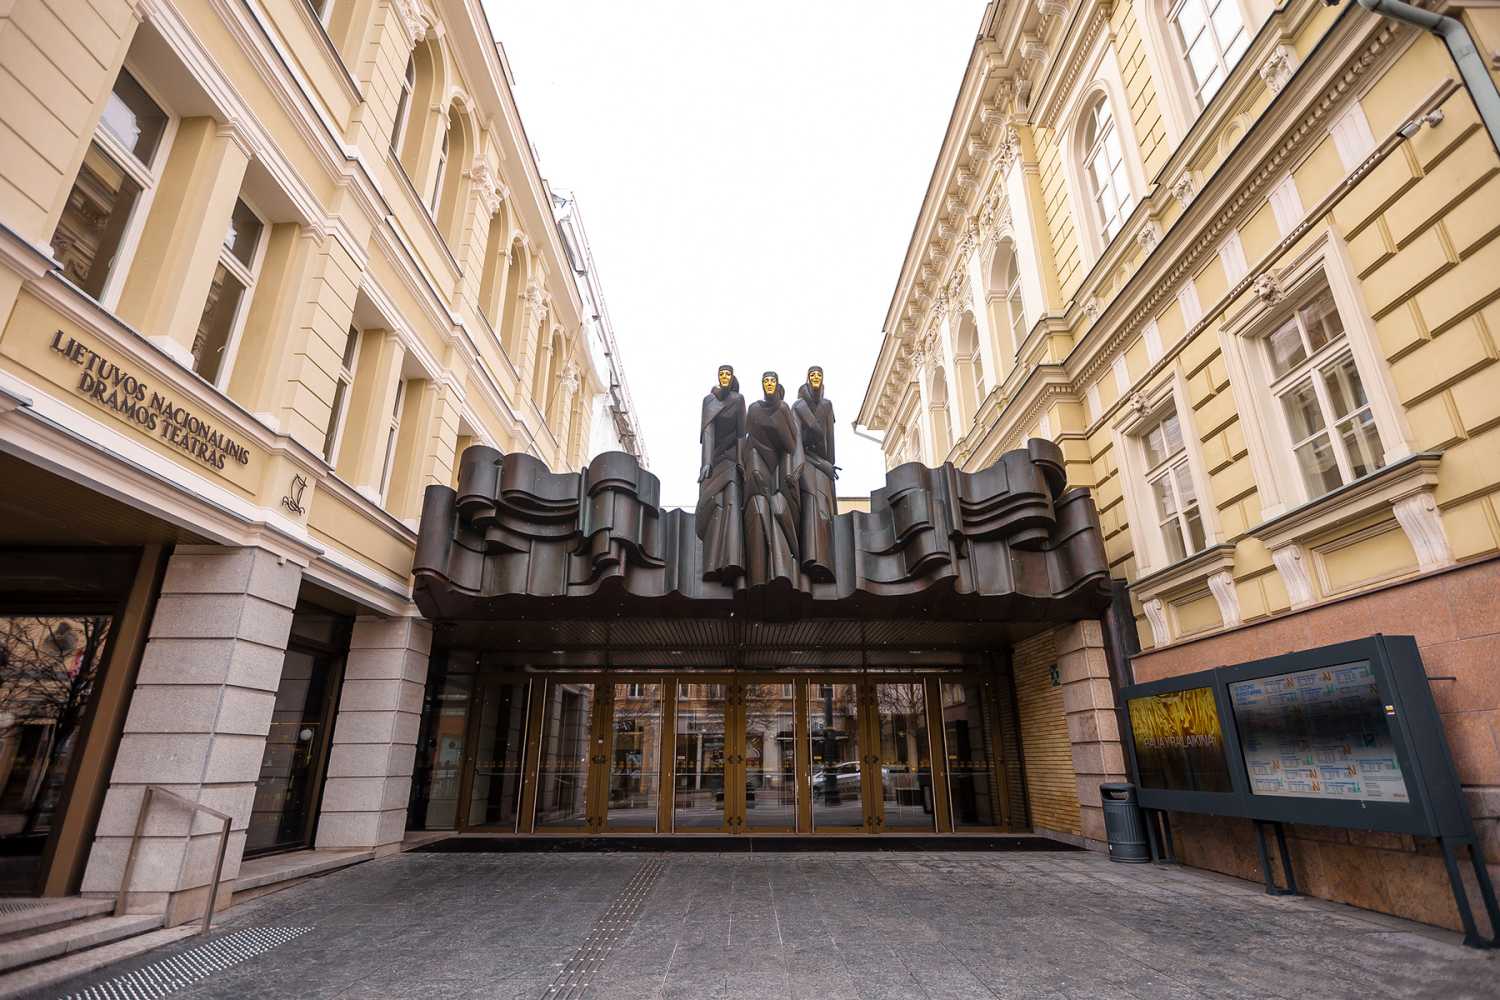 The Lithuanian National Drama Theater (LNDT) in Vilnius